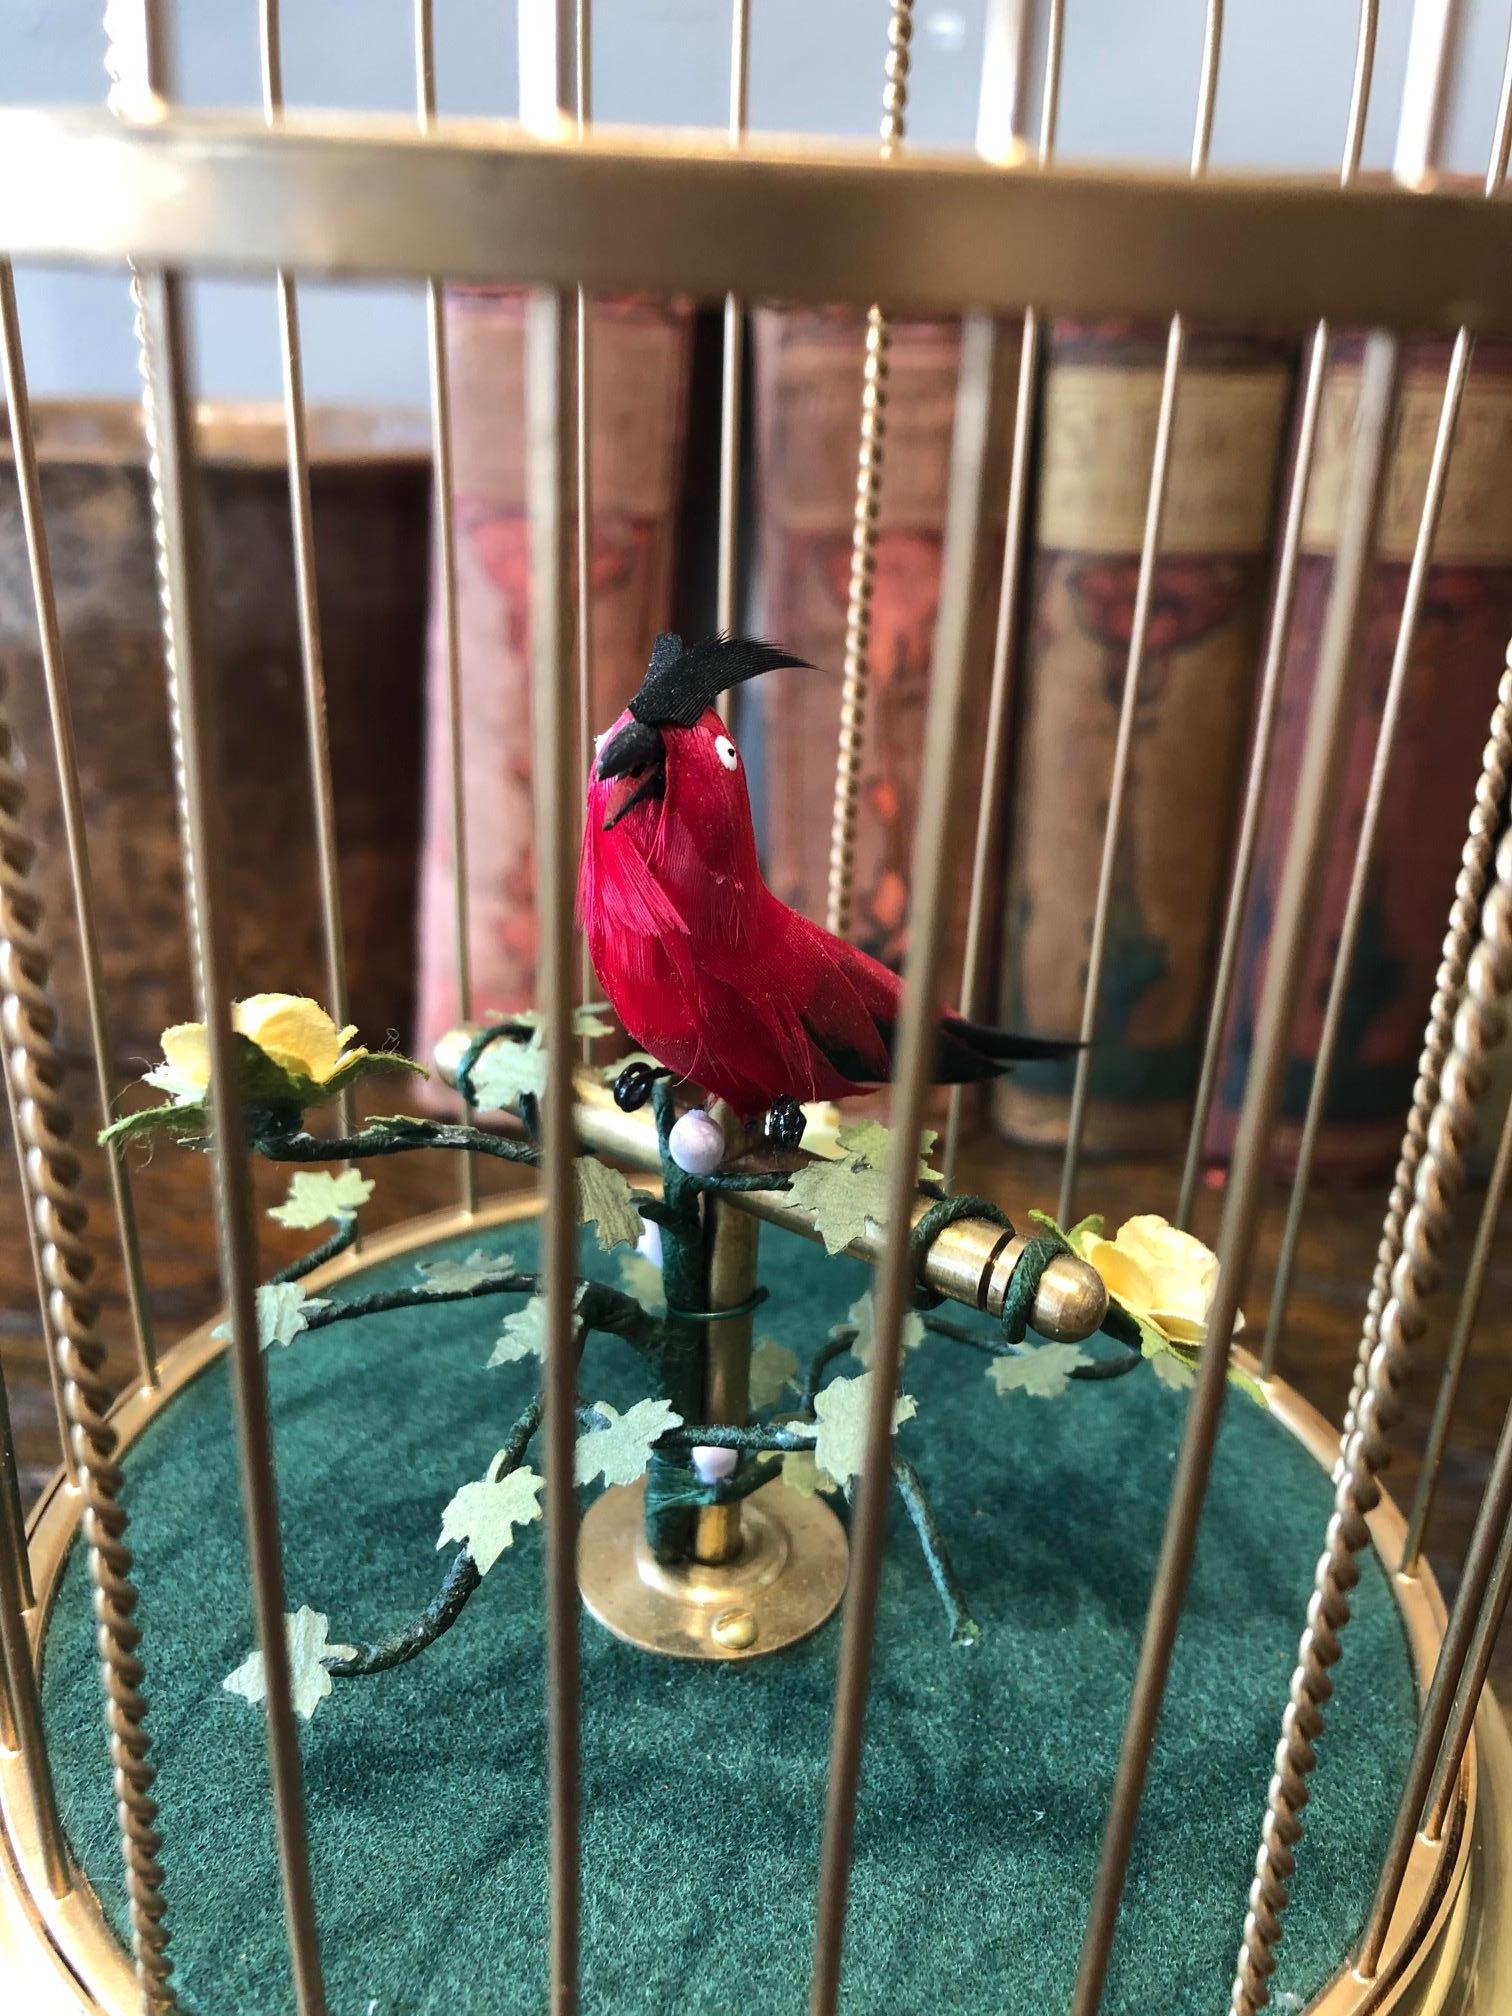 This late 19th century musical bird automaton is entertaining wonder of mechanics with its automated singing bird with a strong voice and flamboyant plumage amidst foliage in a gilded brass cage. Comes with a lifetime warranty in ever in need of